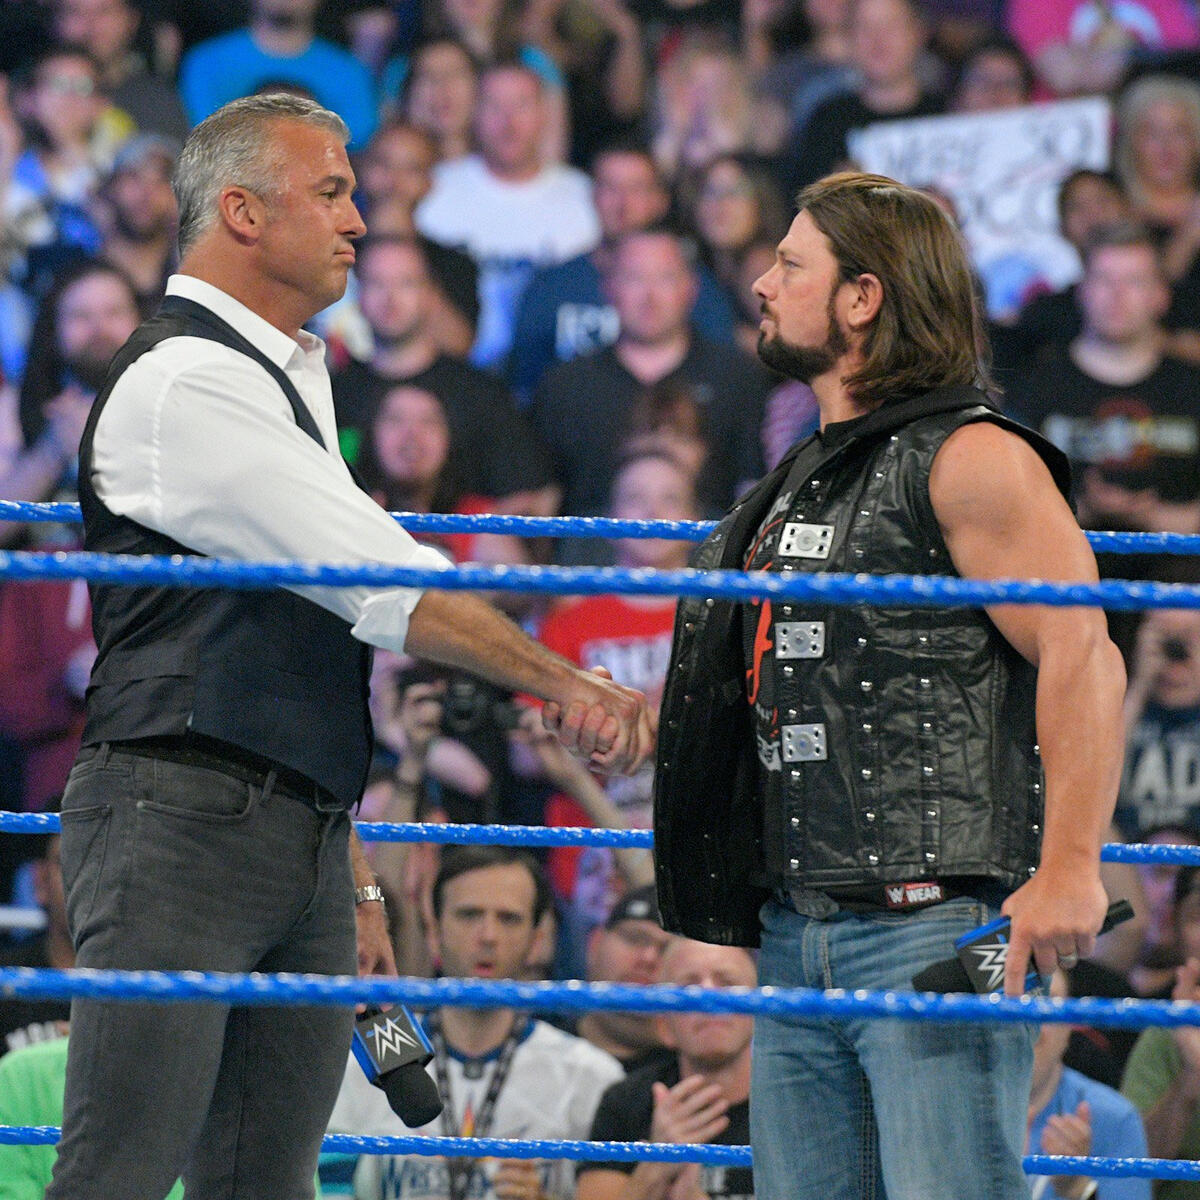 Shane and Styles shake hands two days after their epic clash at The Ultimate Thrill Ride.